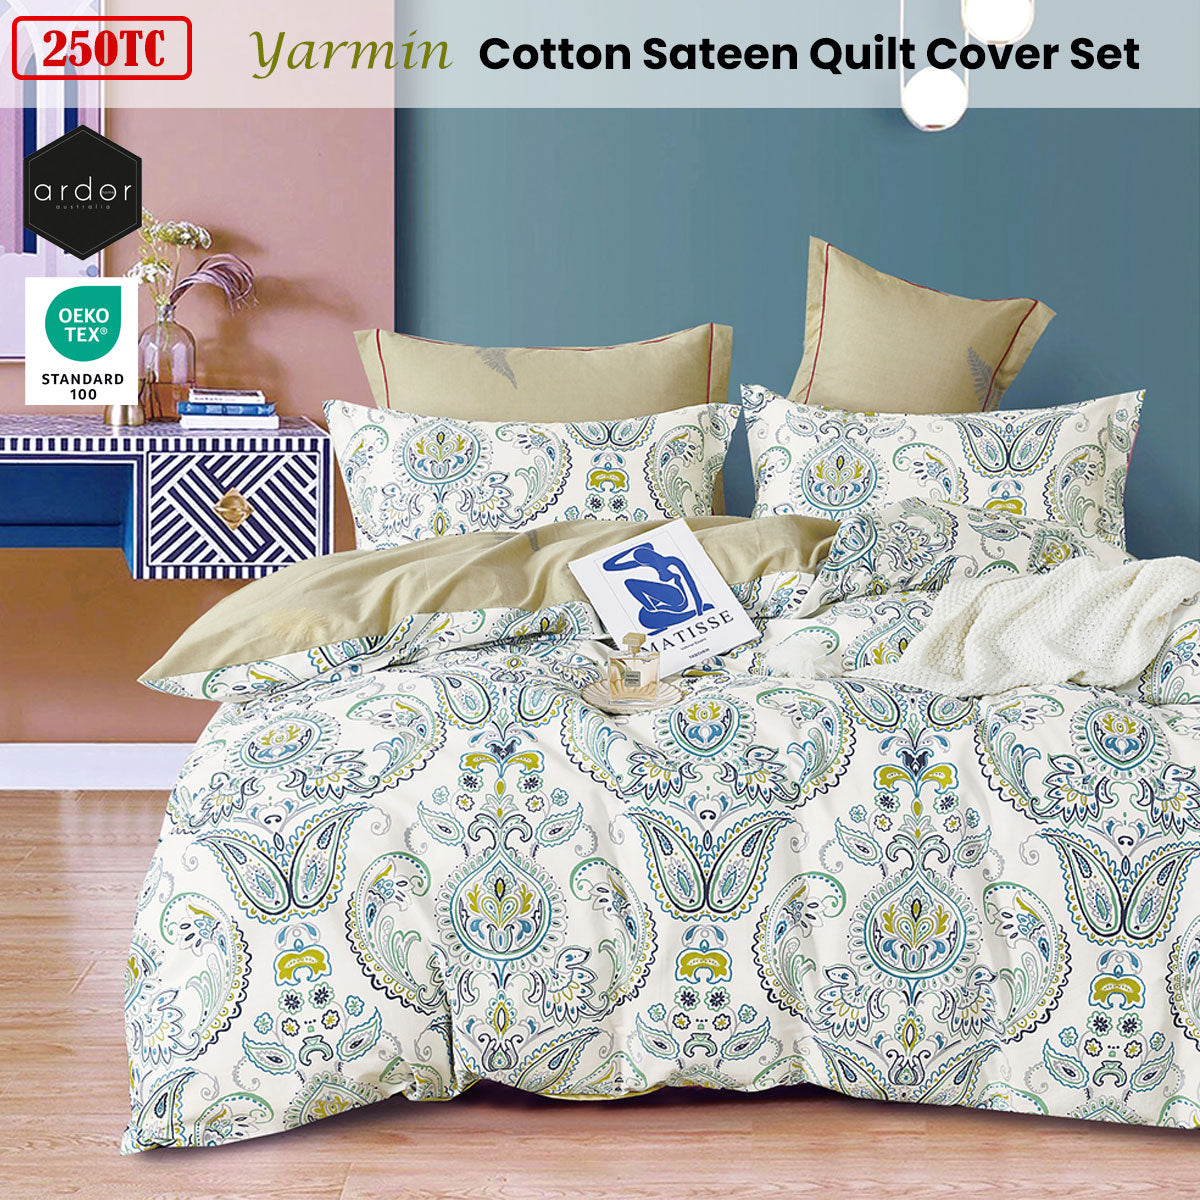 250TC Yarmin Moroccan Cotton Sateen Quilt Cover Set Queen